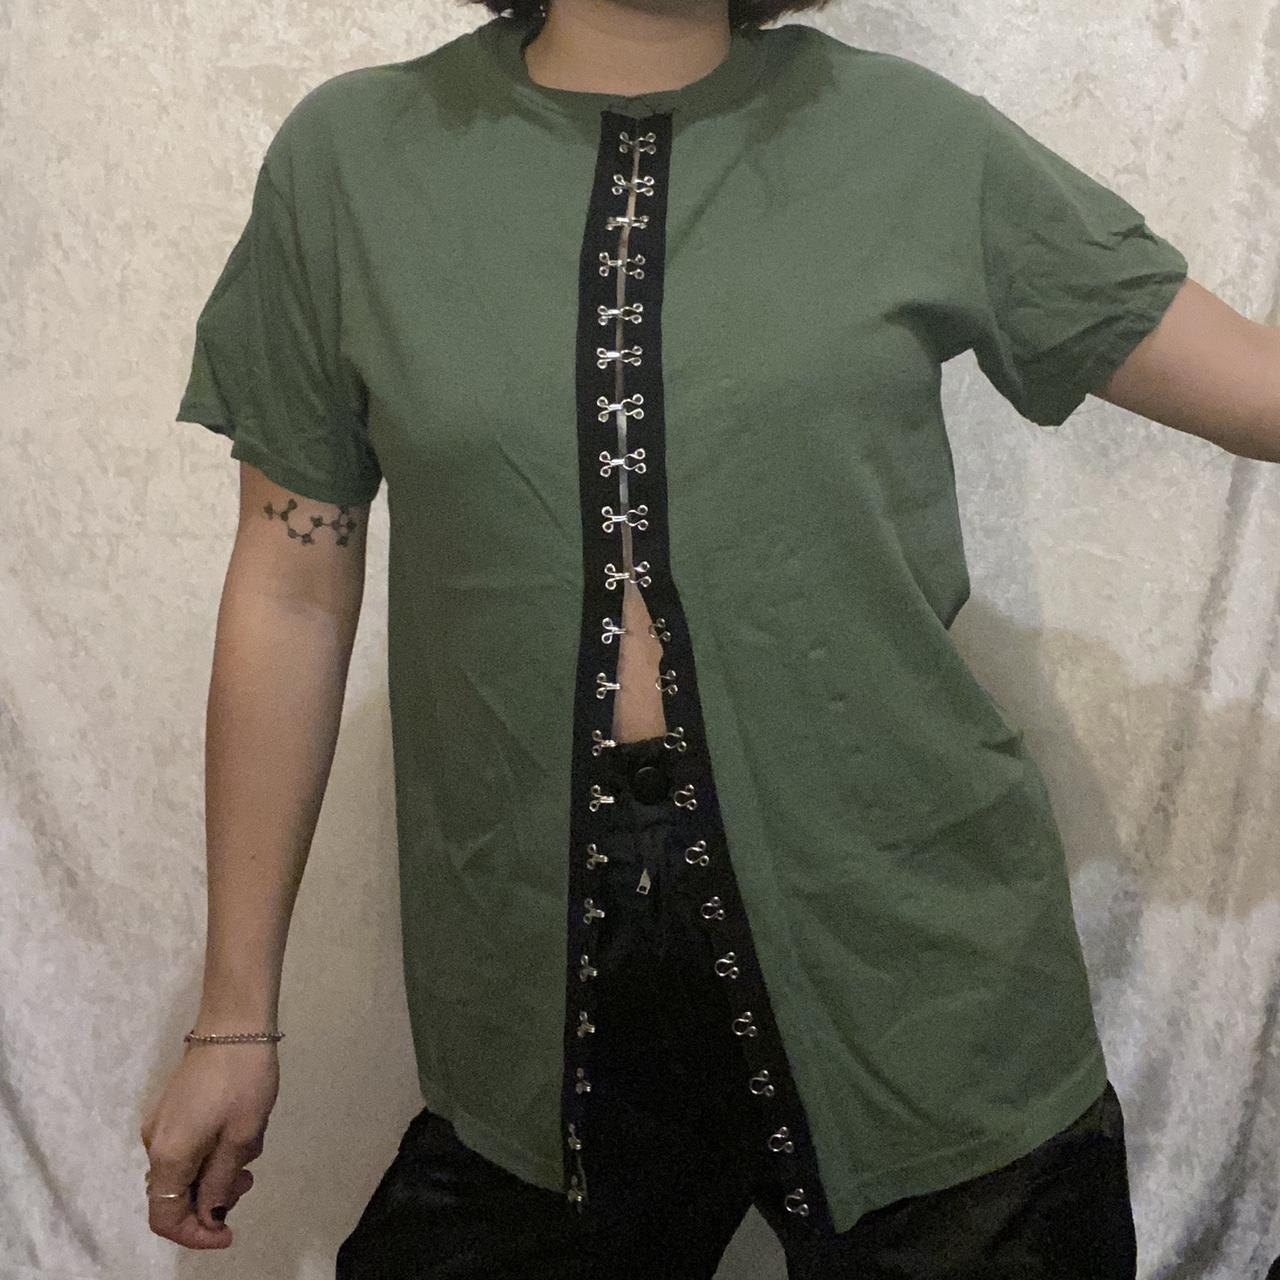 Product Image 3 - Army green split tee by